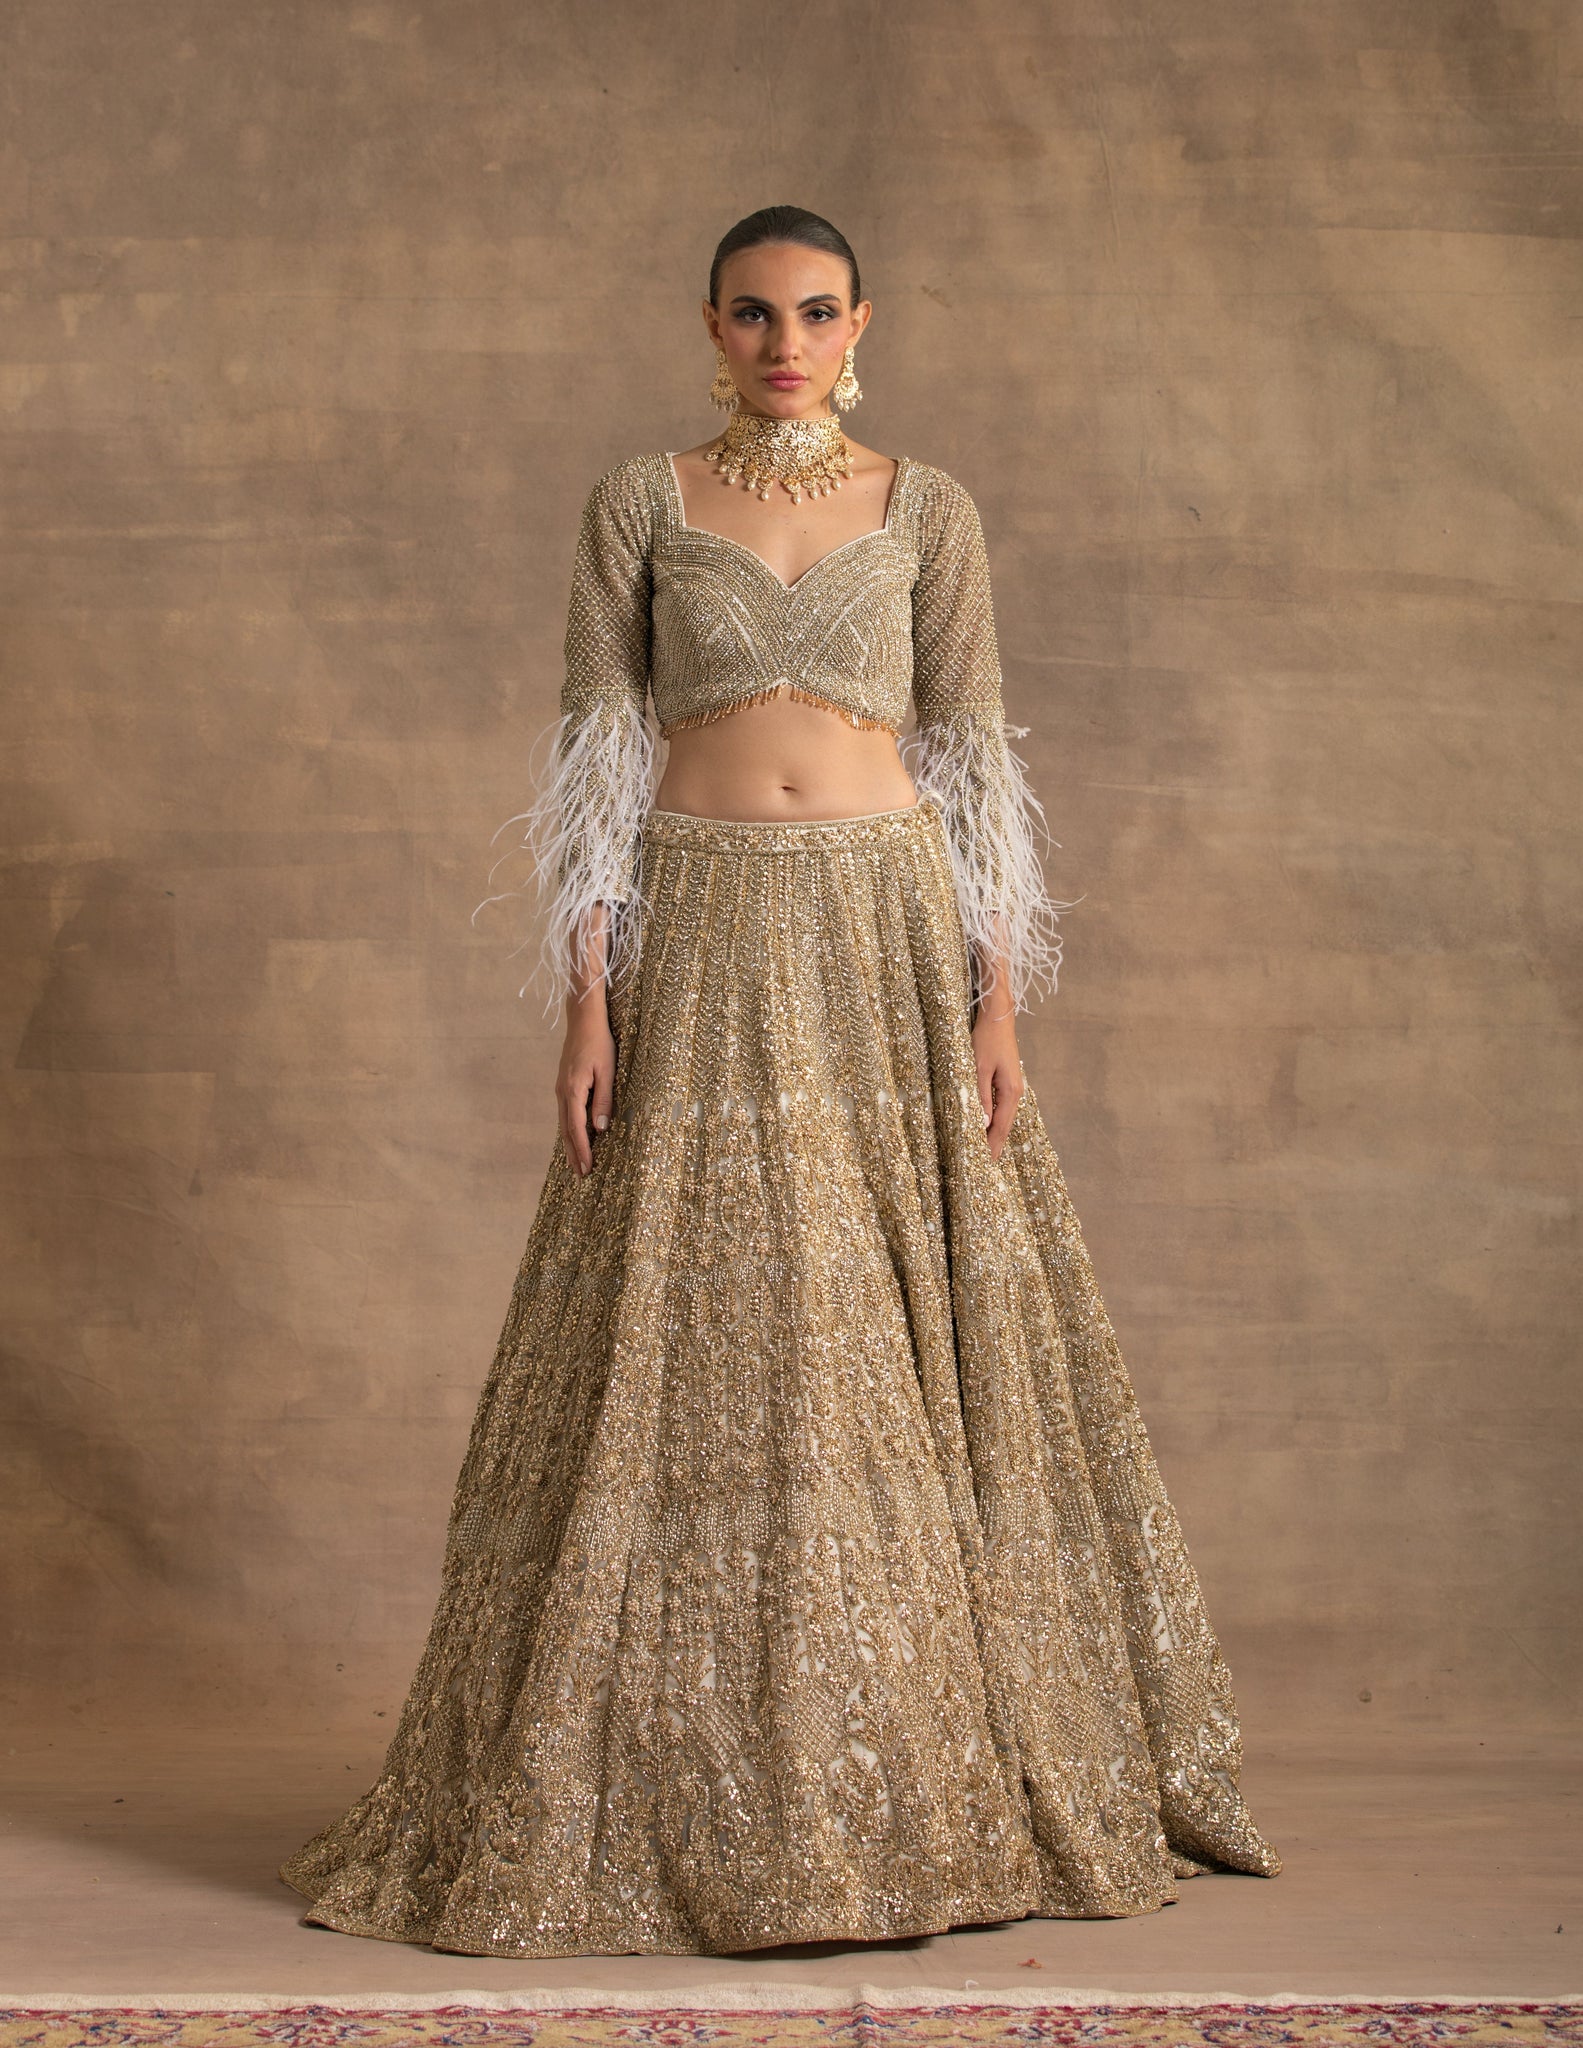 Presenting the Miraya lehenga - stardust & all things magical. Dipped in  hues of molten golds and dreamy ivories, this collection is, an… | Instagram